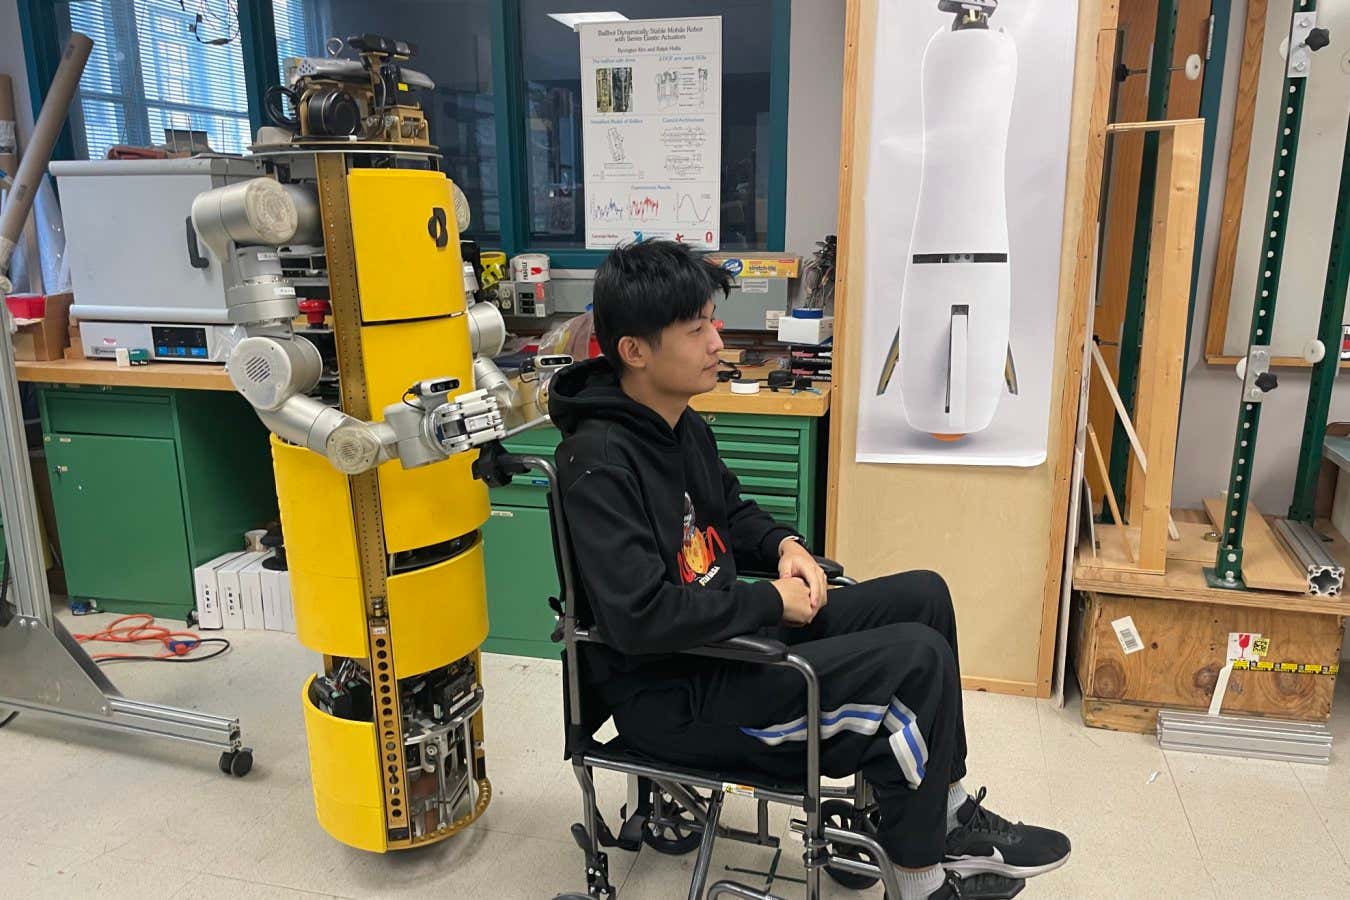 Ball-balancing robot could assist wheelchair users